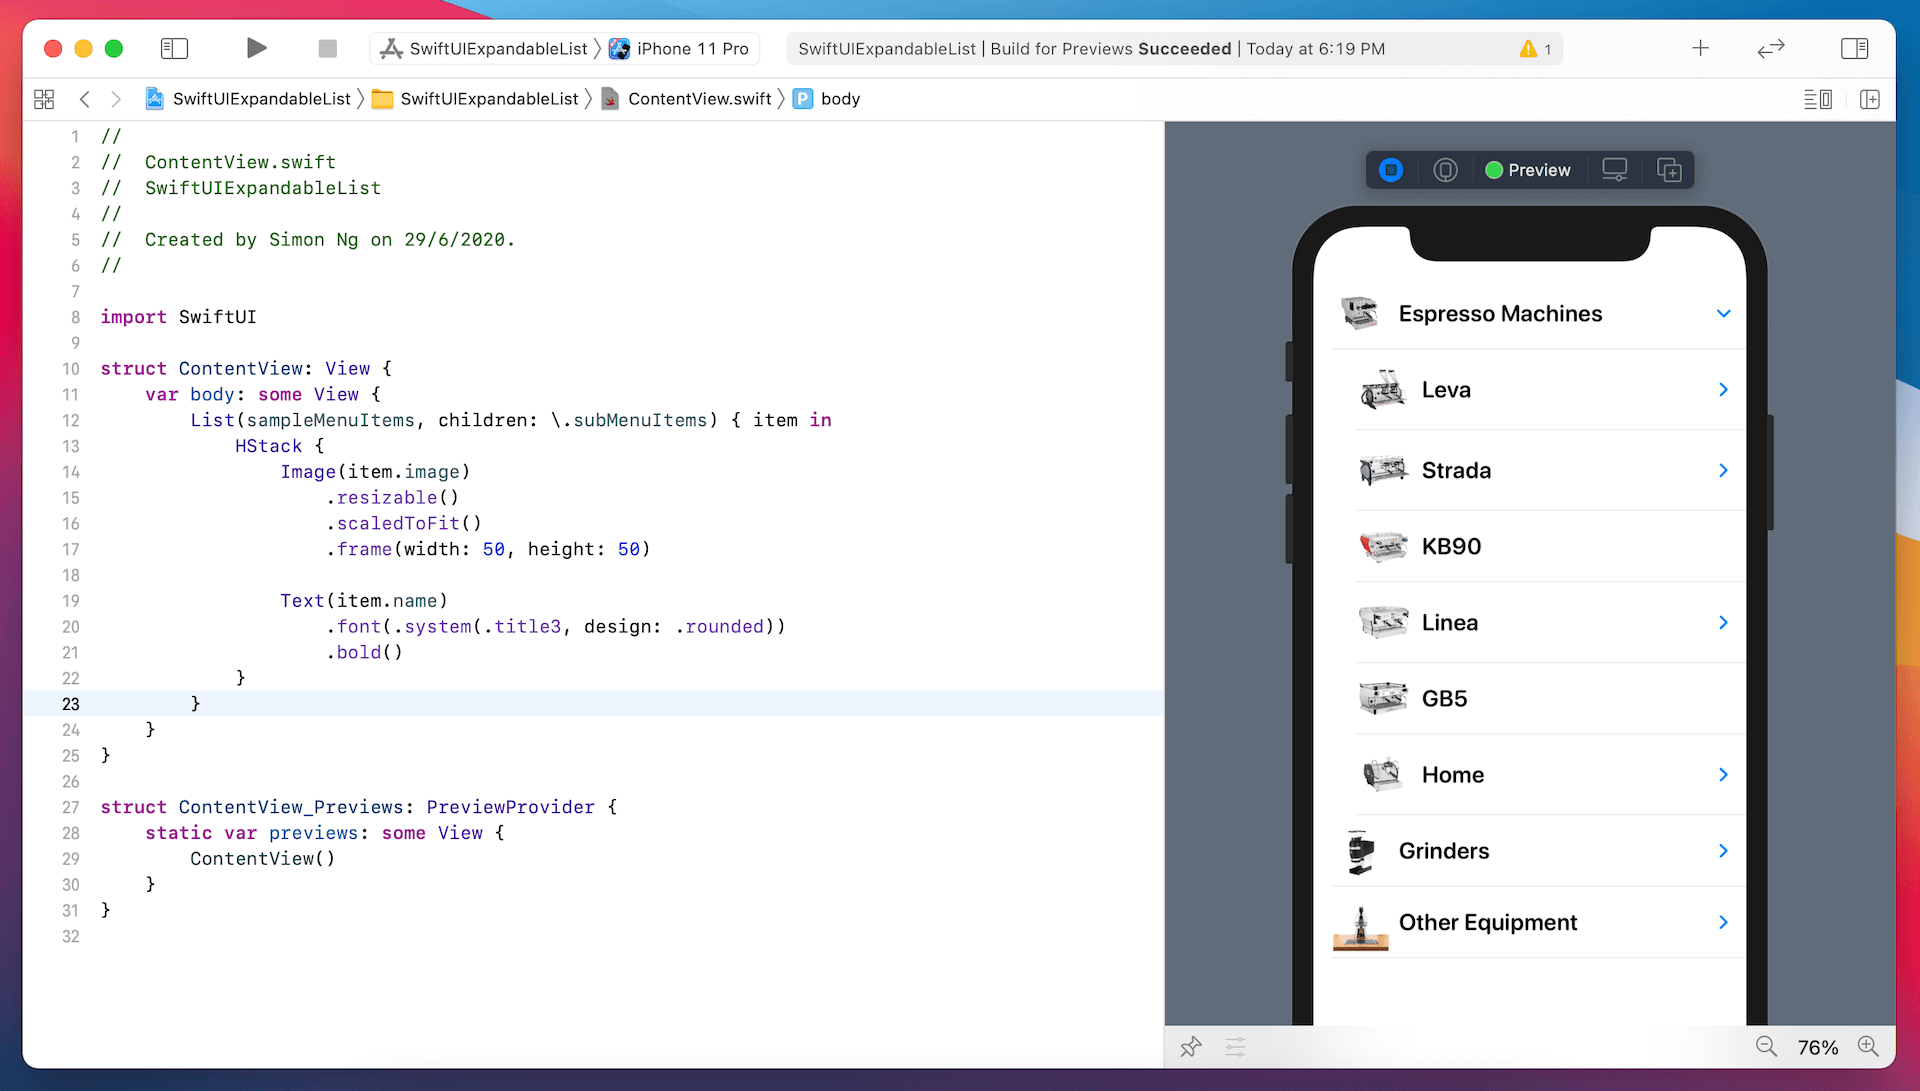 swiftui-expandable-list-iphone-demo